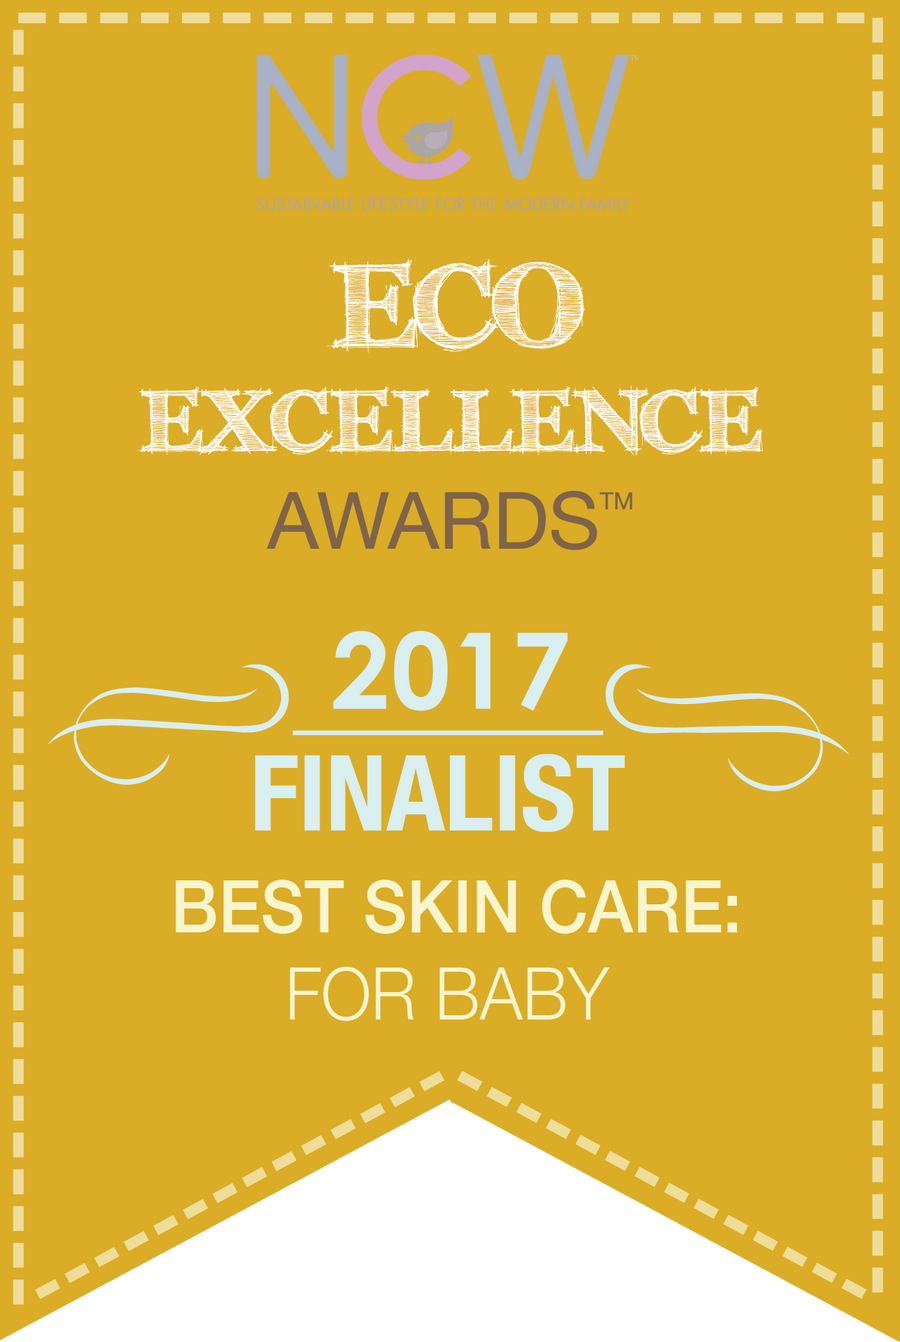 Best Baby Skincare Eco Excellence Awards